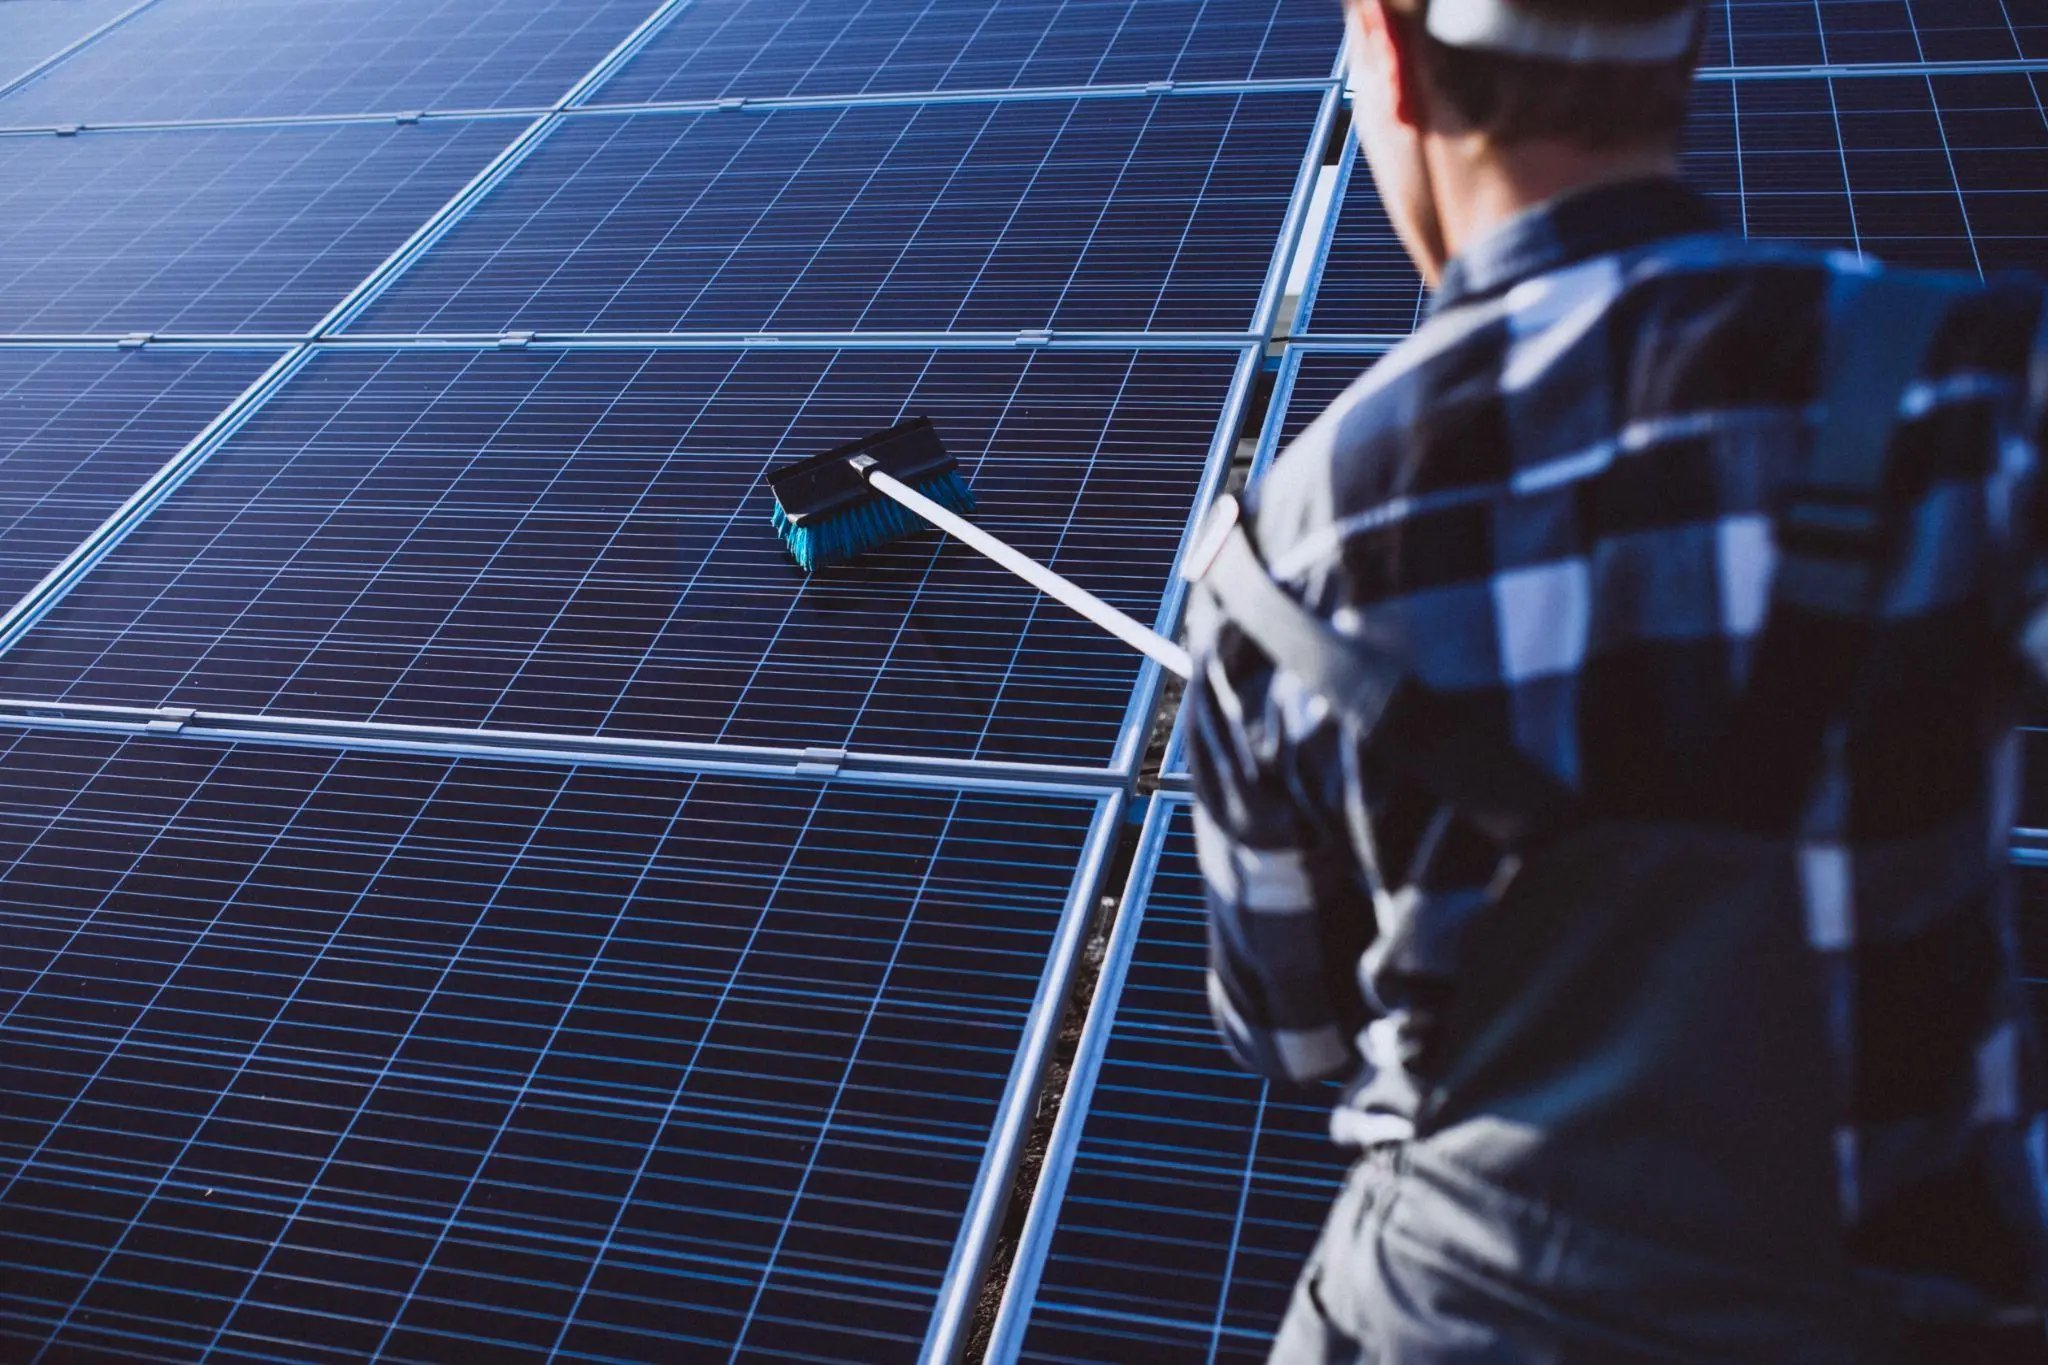 A worker is brushing solar panels.